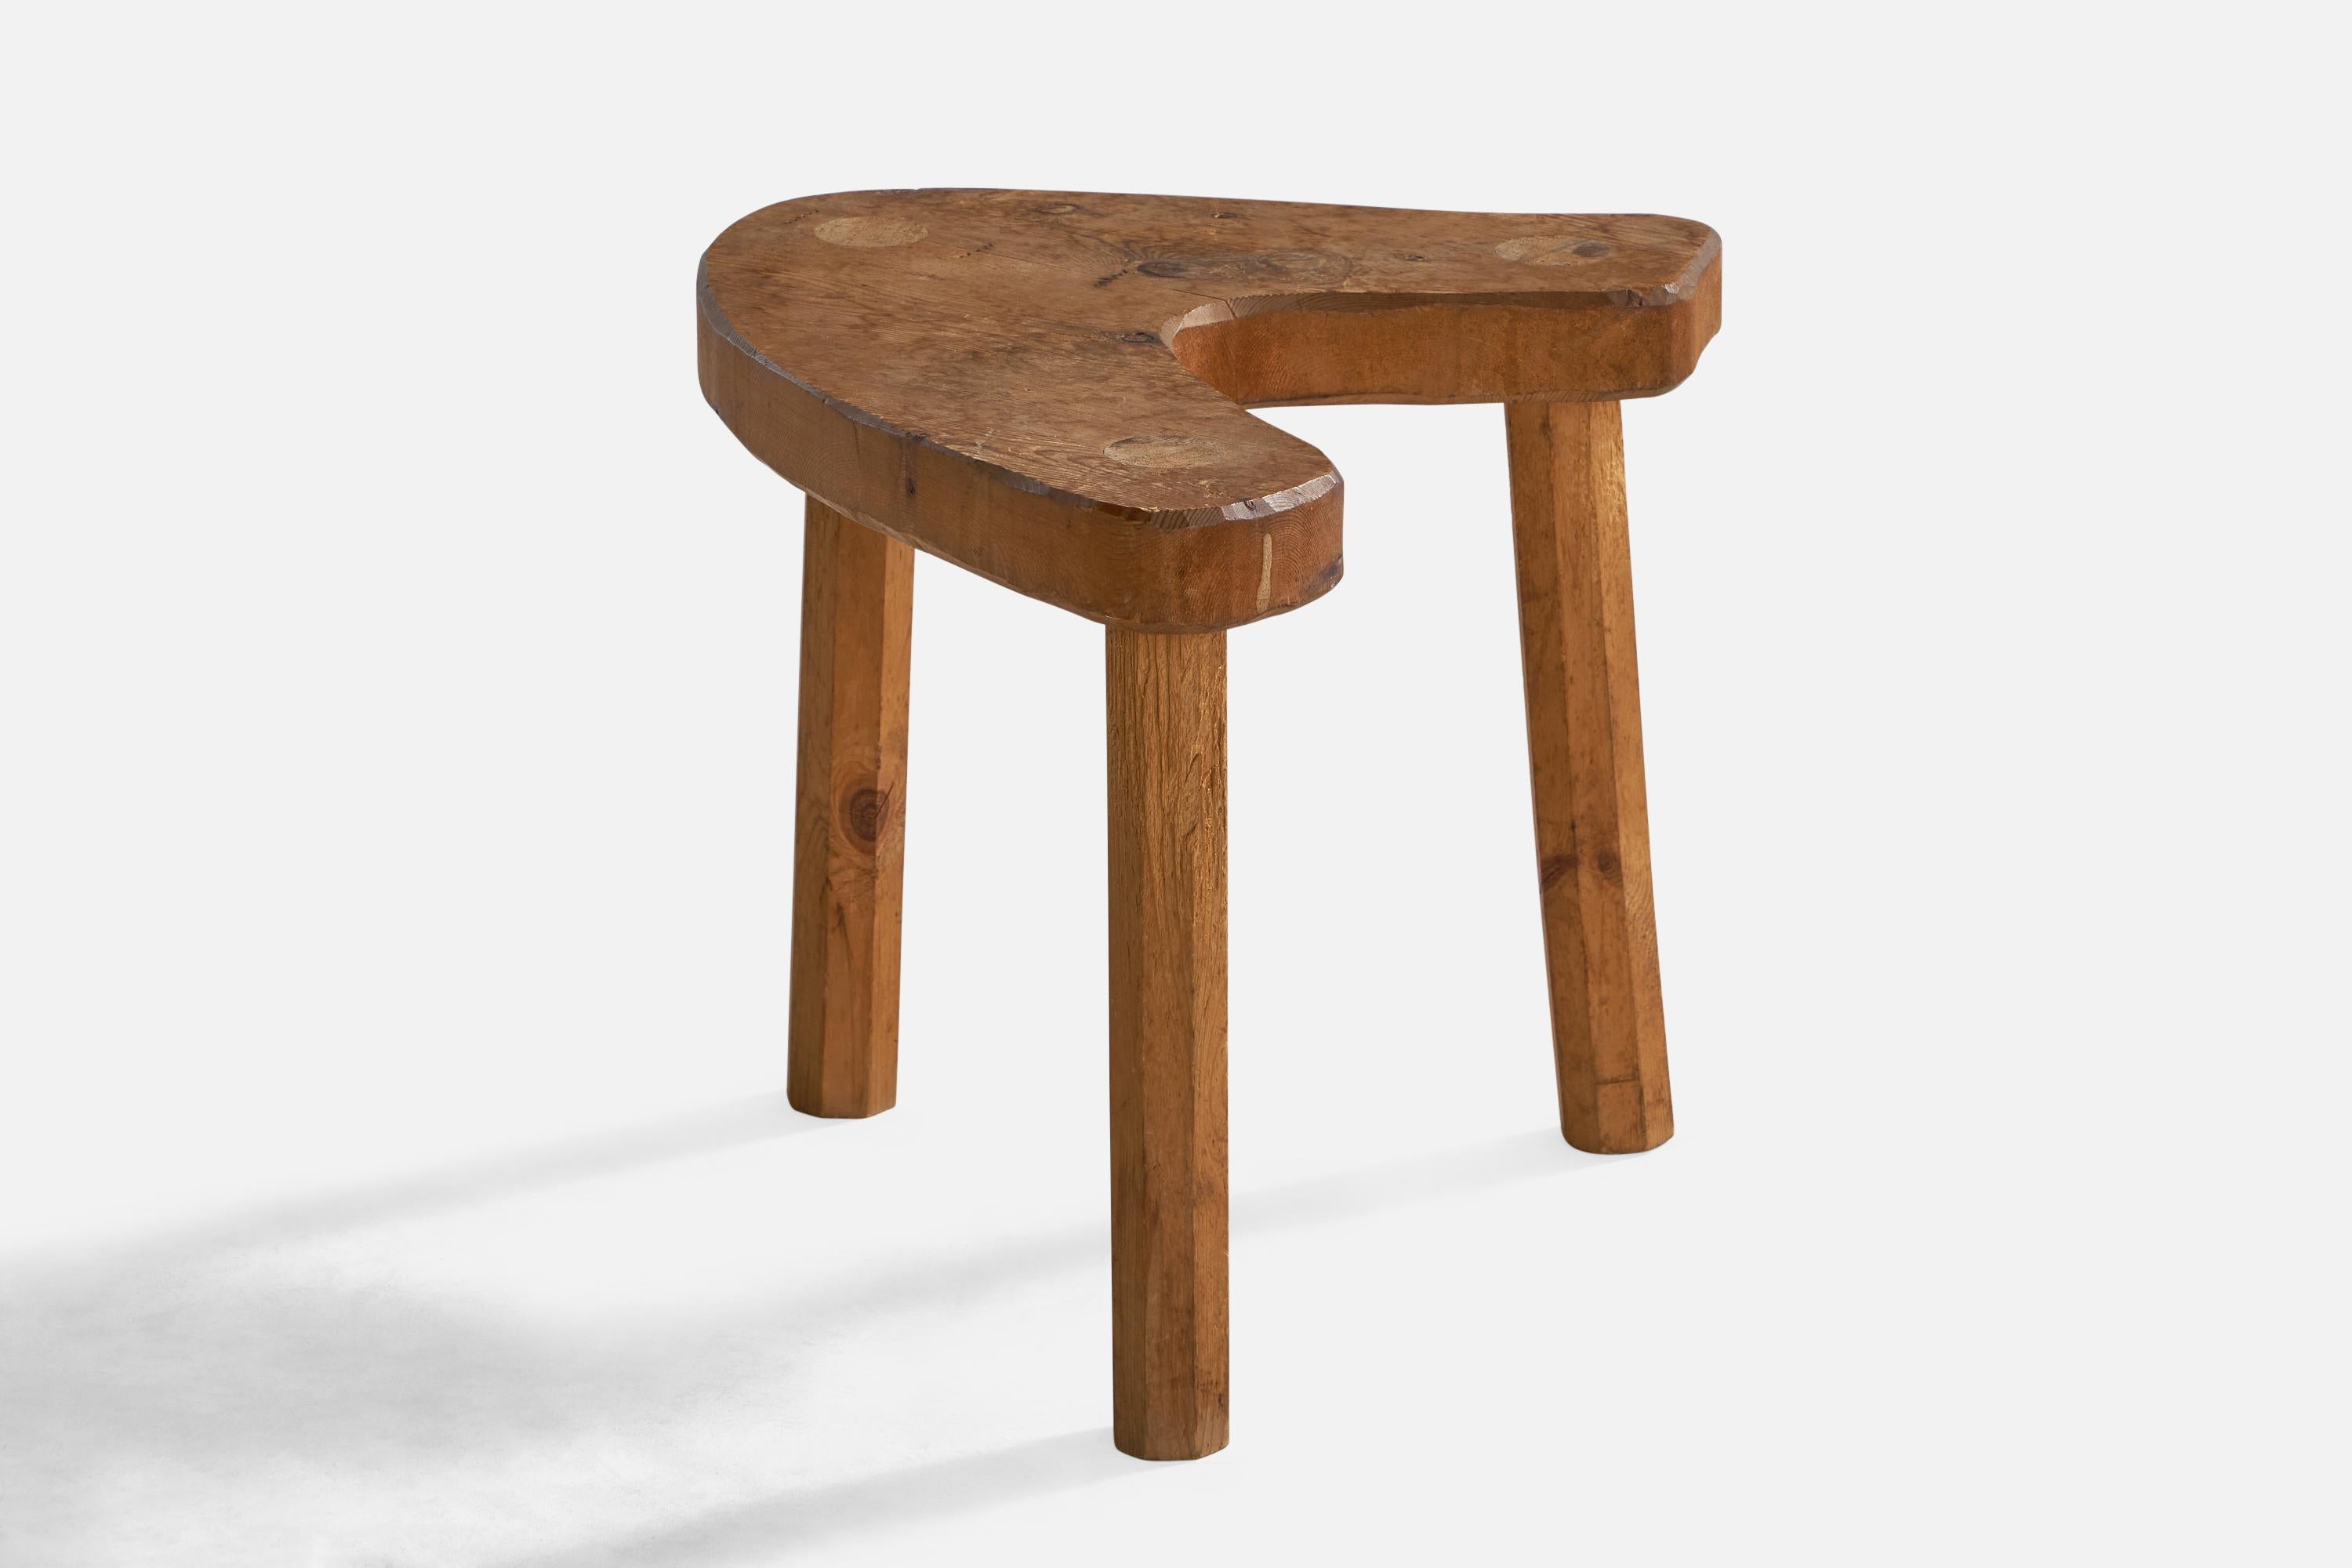 A freeform pine stool designed and produced in Sweden, c. 1960s.

Seat height: 15”